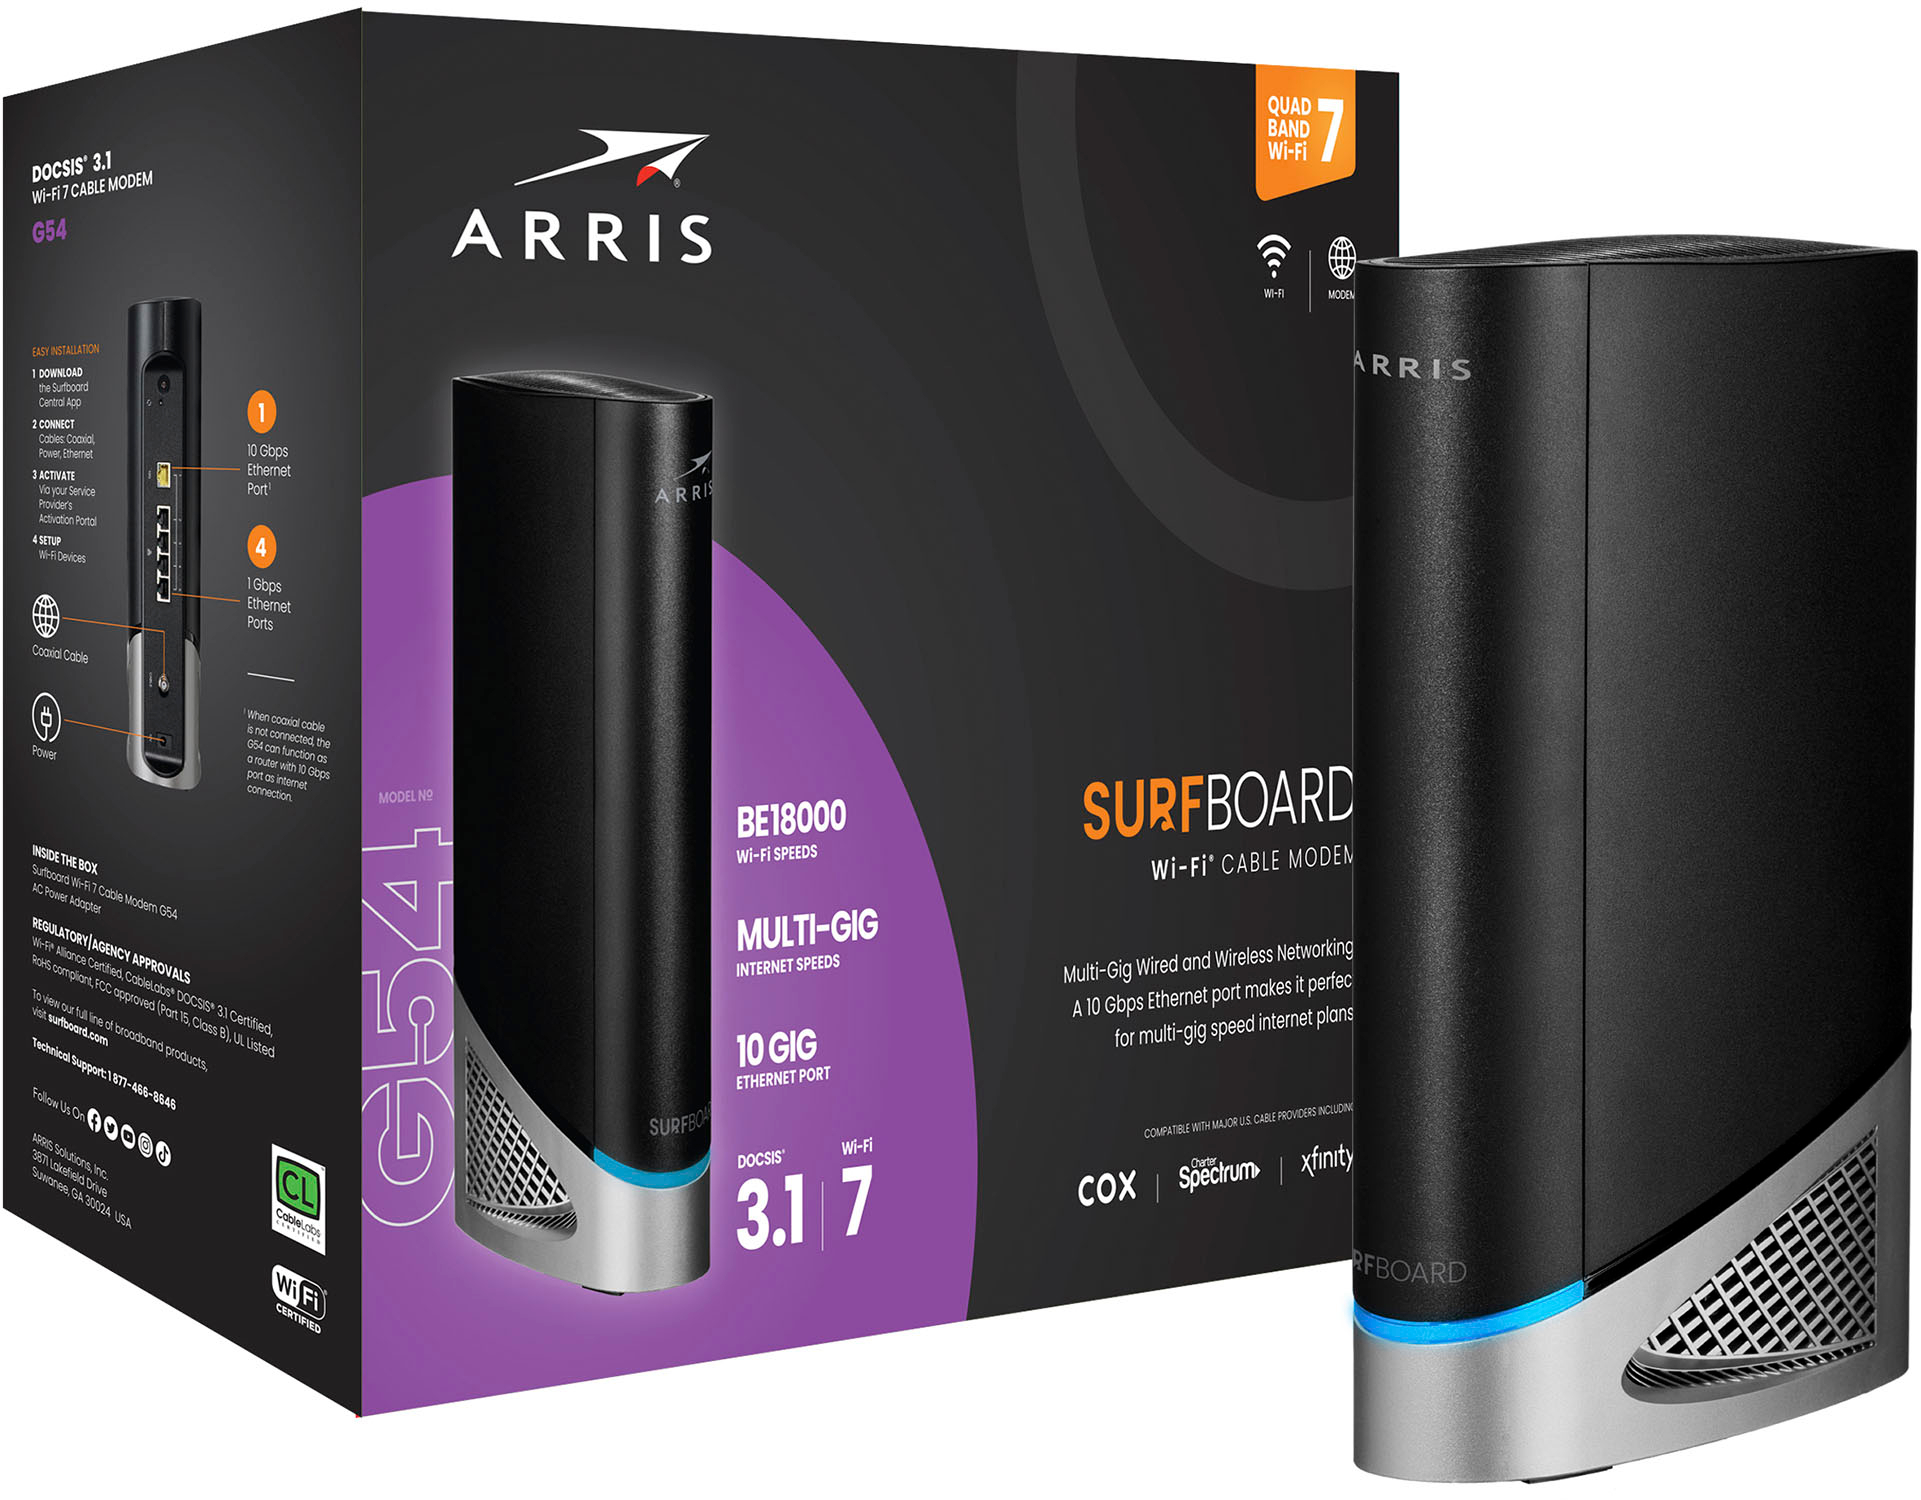 Wi-Fi Cable Modems